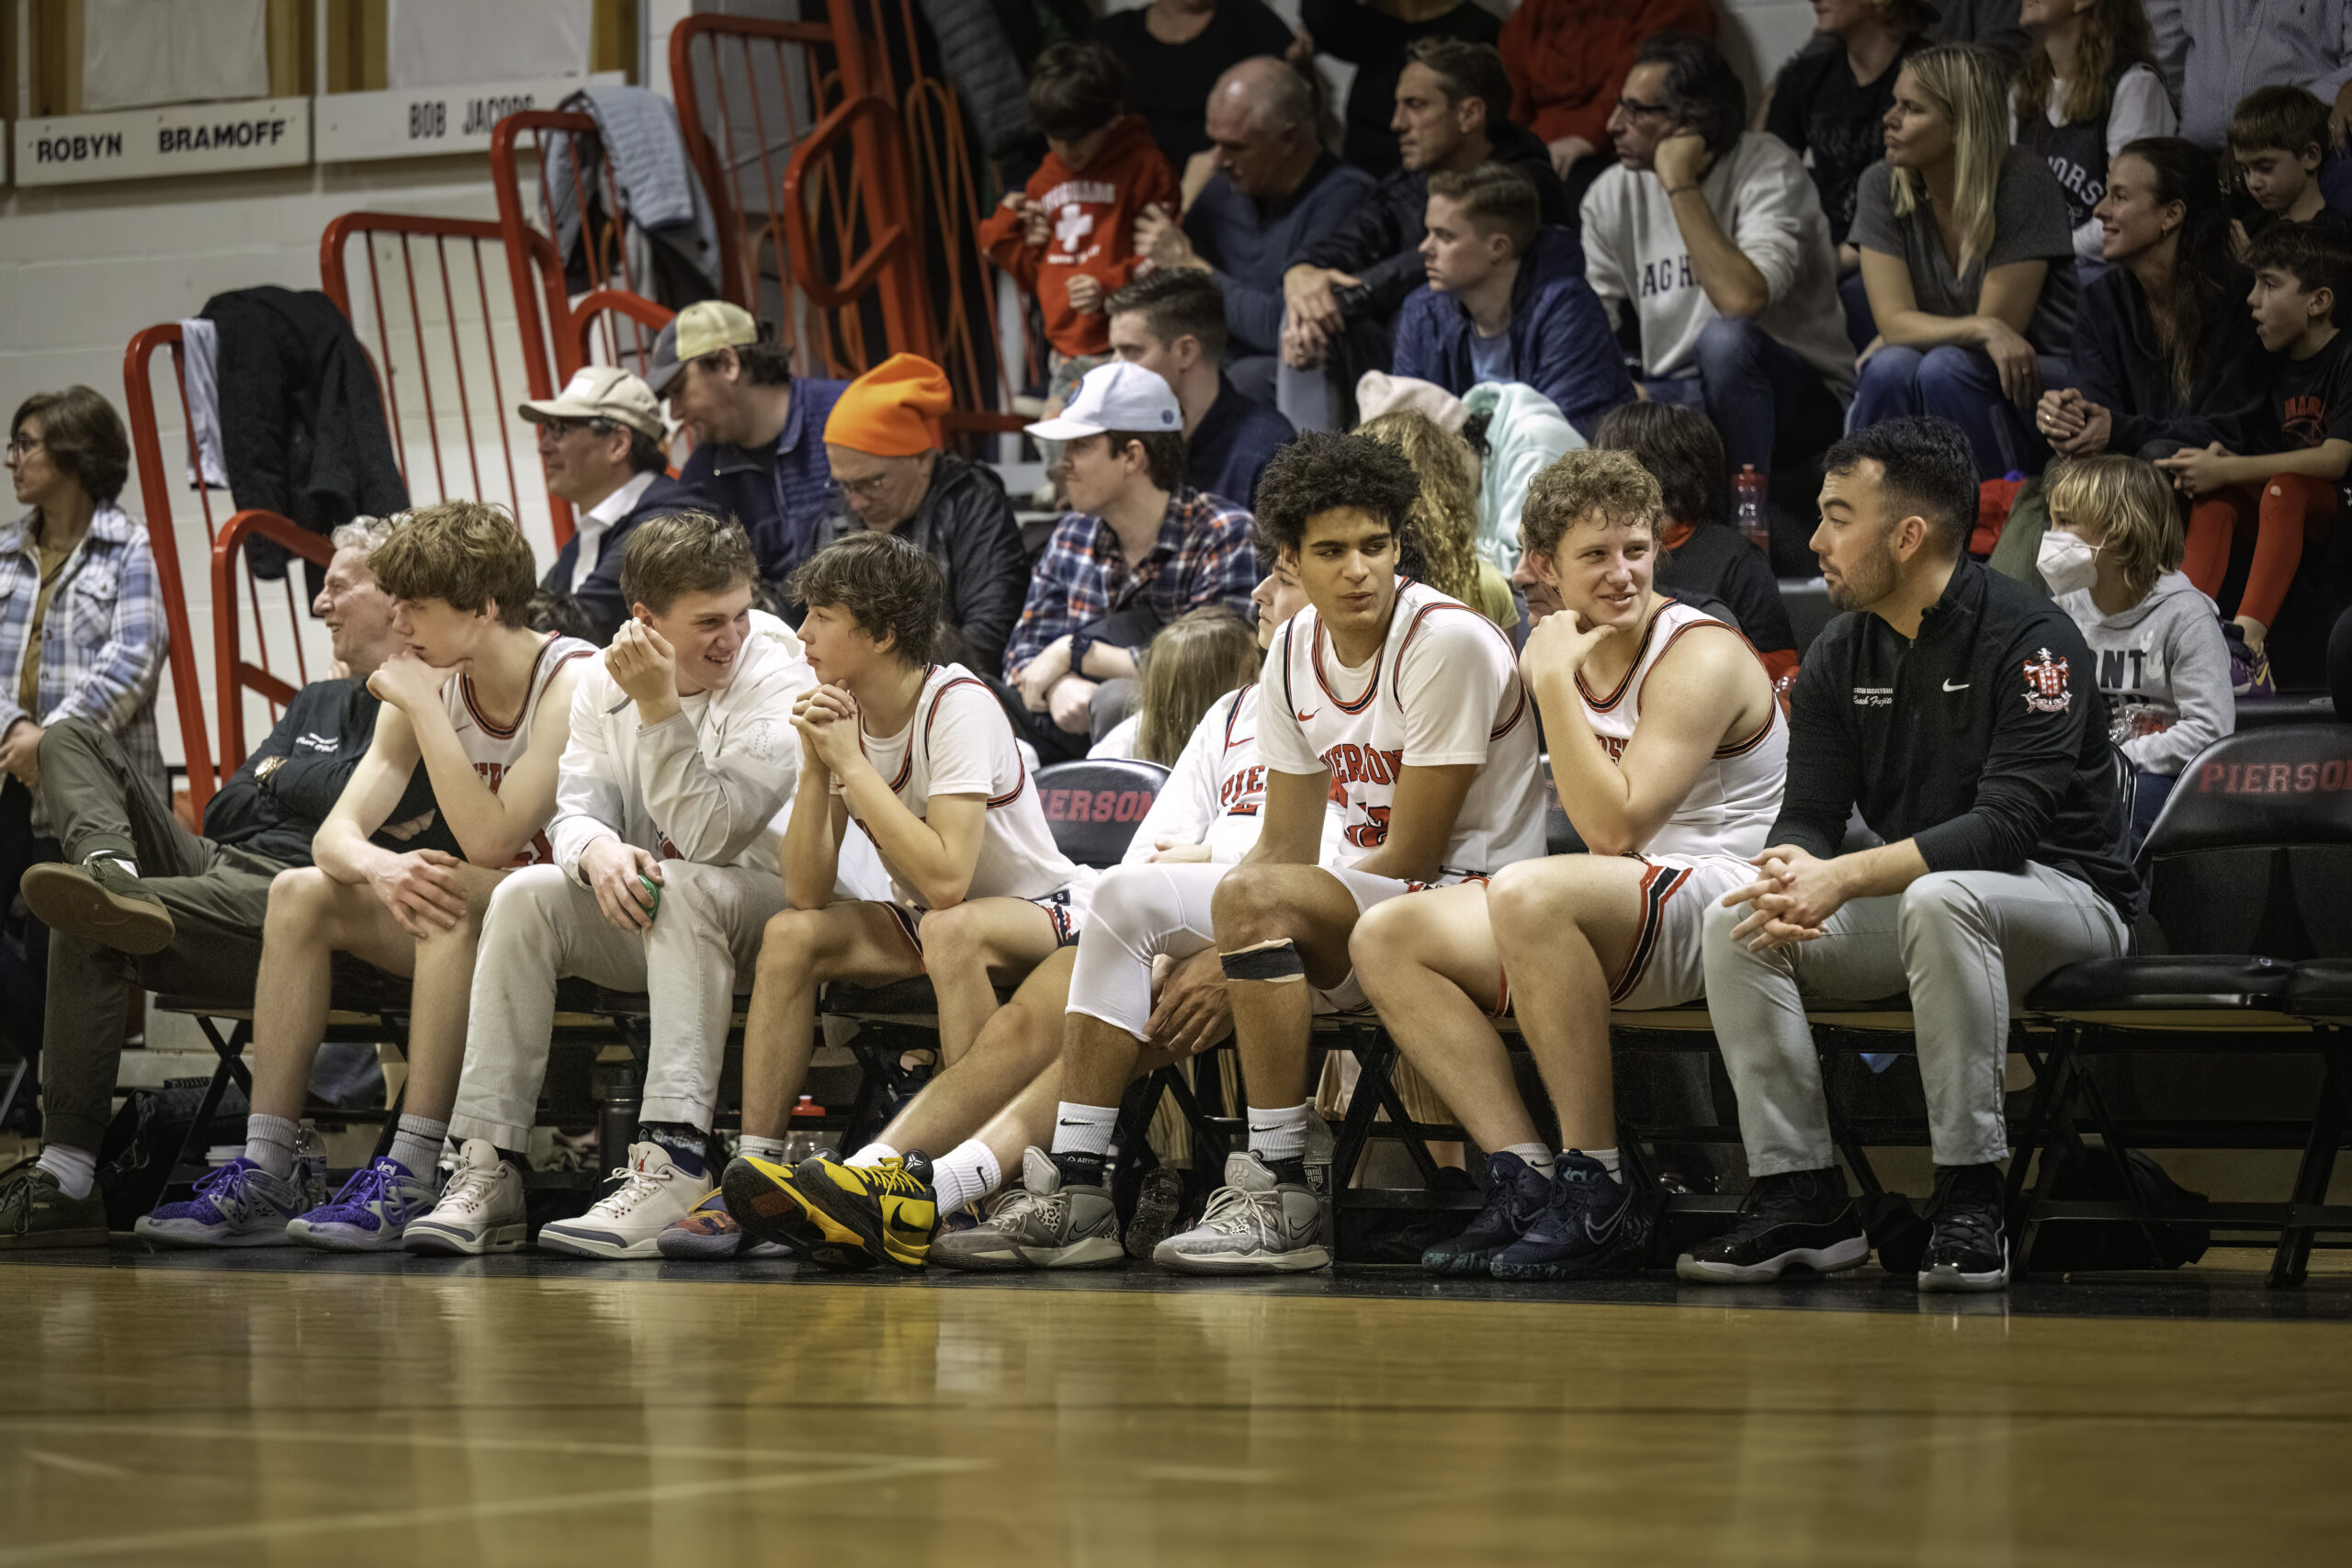 It was all smiles for the Whalers and their starters on Friday night as they enjoyed a lopsided victory over Center Moriches.   MARIANNE BARNETT